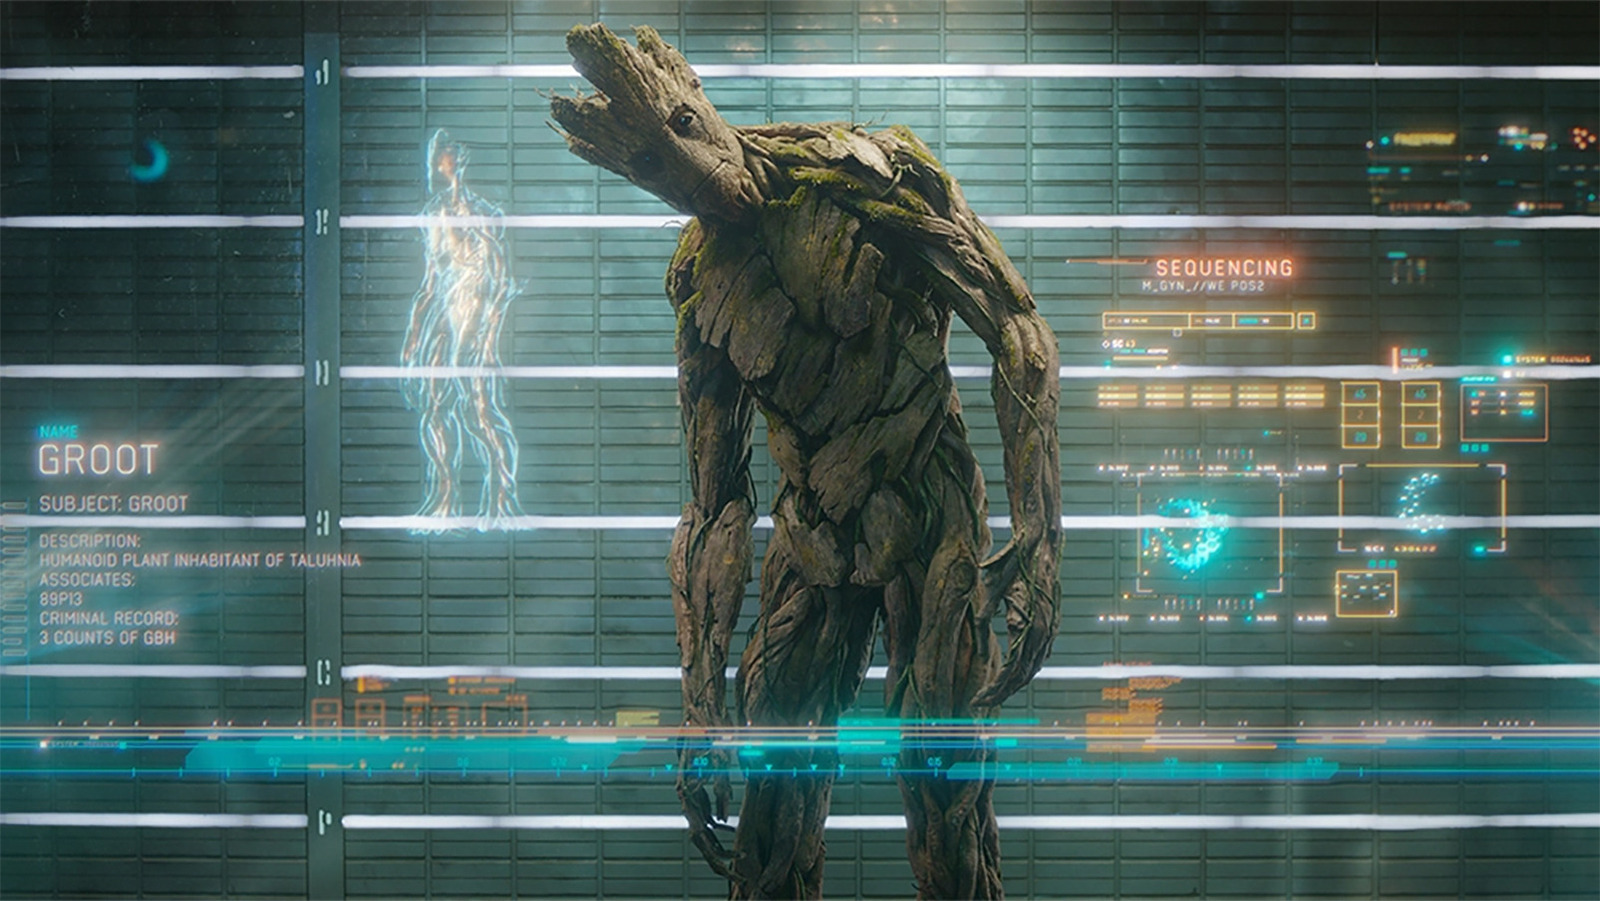 Remember When Vin Diesel Prepared To Play Guardians Of The Galaxy’s Groot On Stilts?